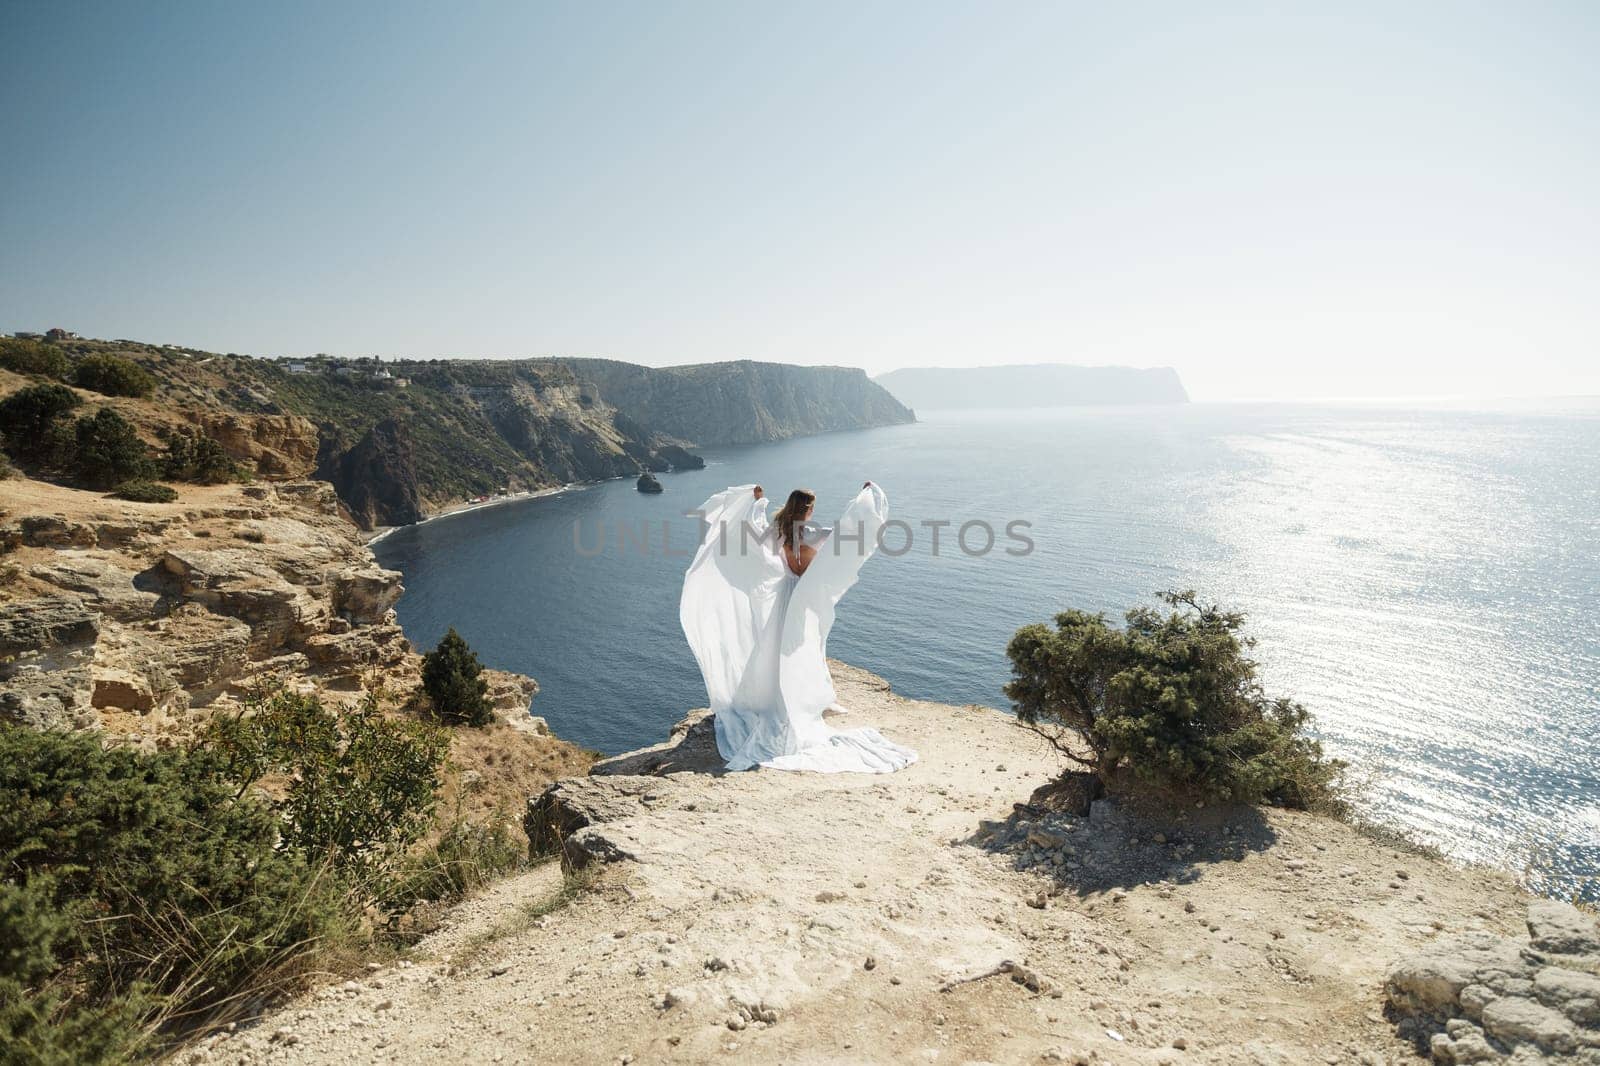 woman white dress stands on a rocky cliff overlooking the ocean. The scene is serene and peaceful, with the woman's dress billowing in the wind. The ocean in the background is calm and blue